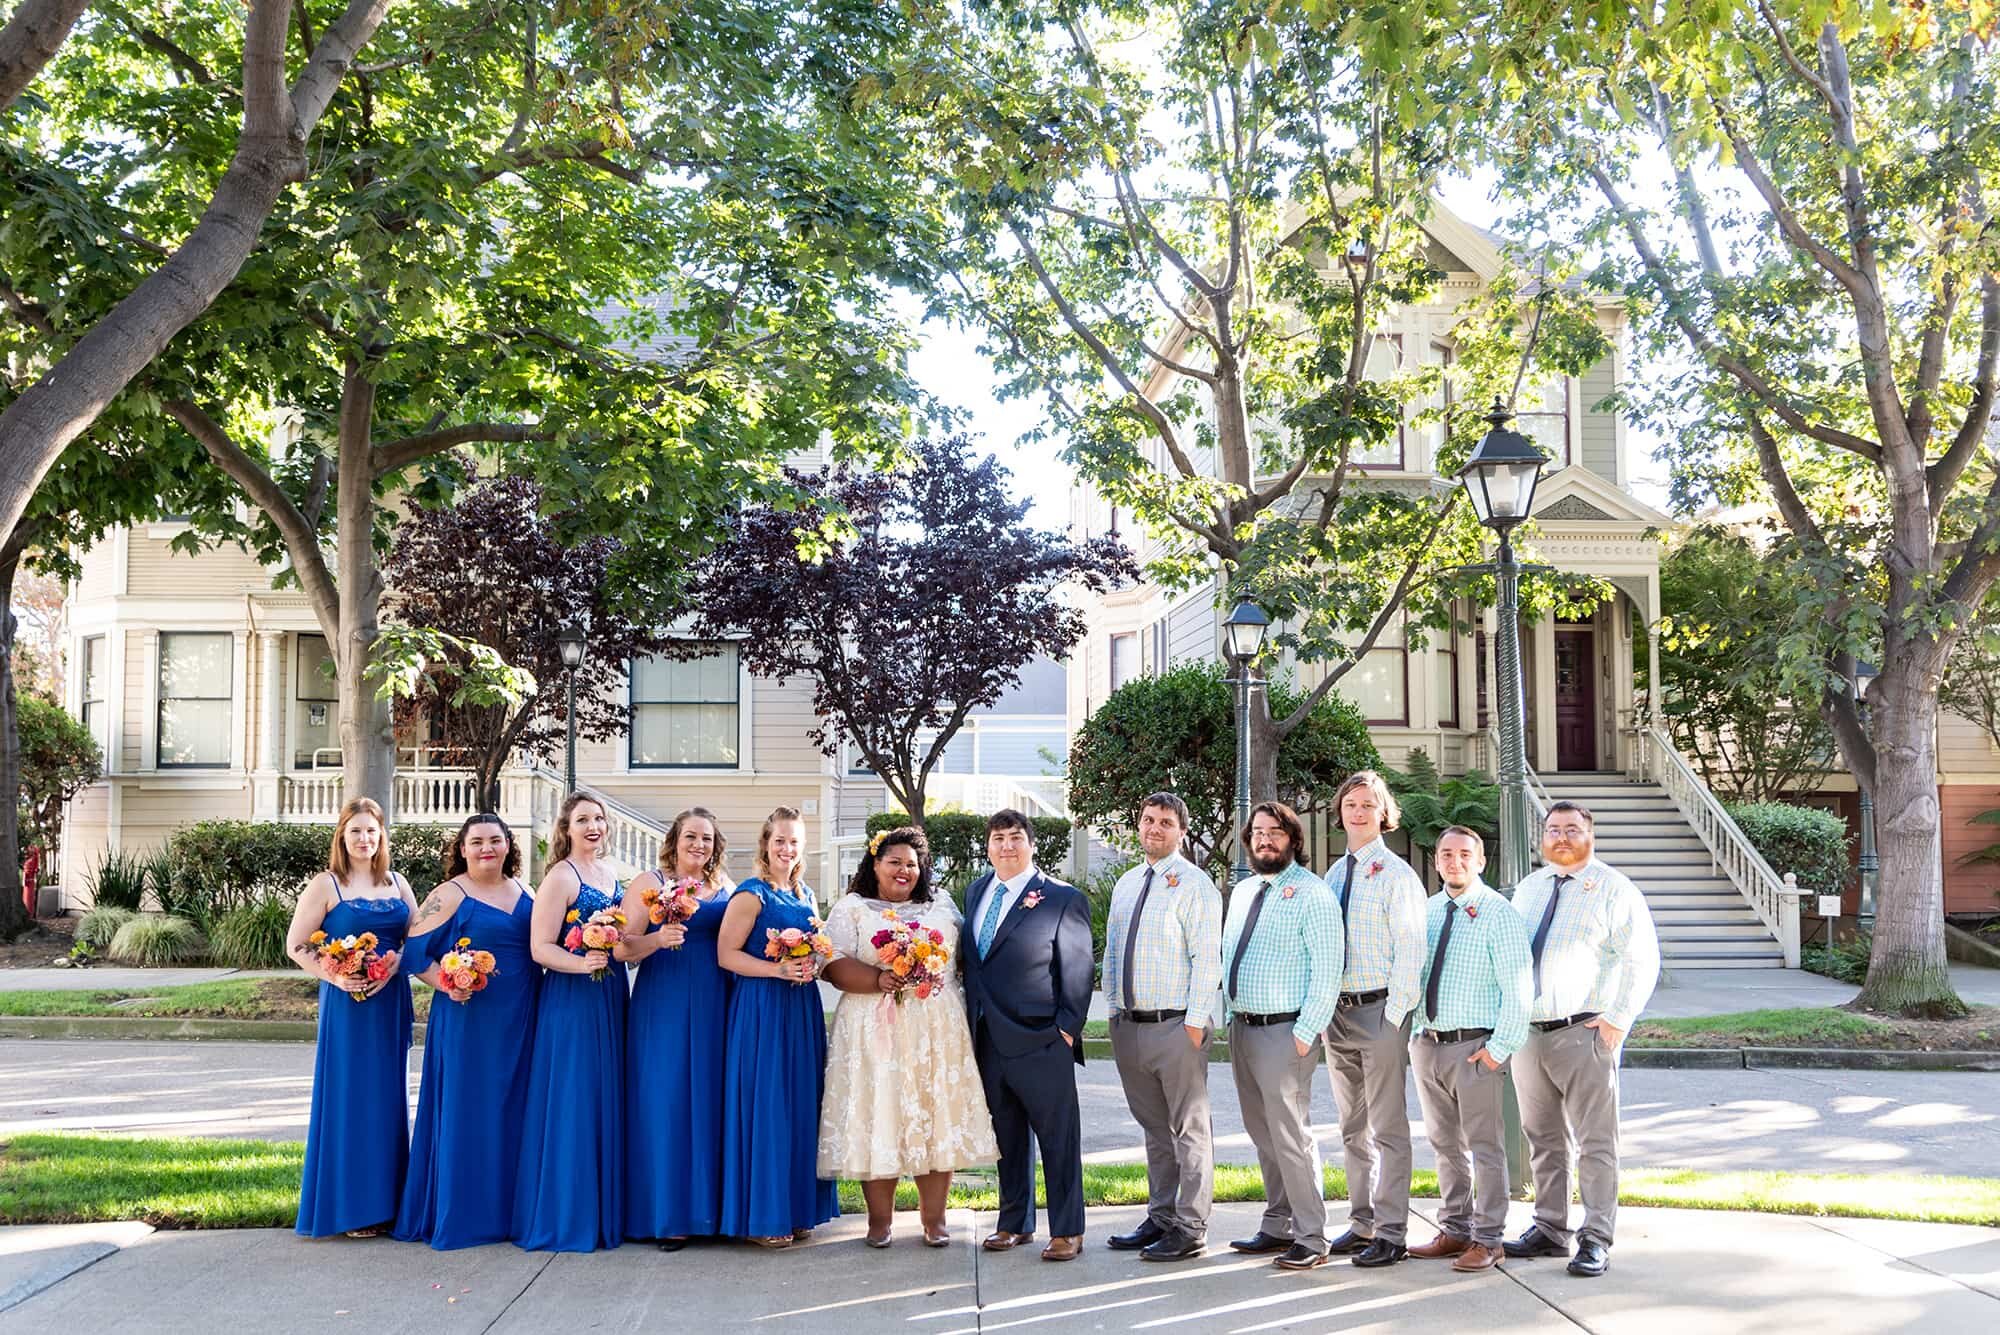 Wedding party lined up on street in Preservation Park